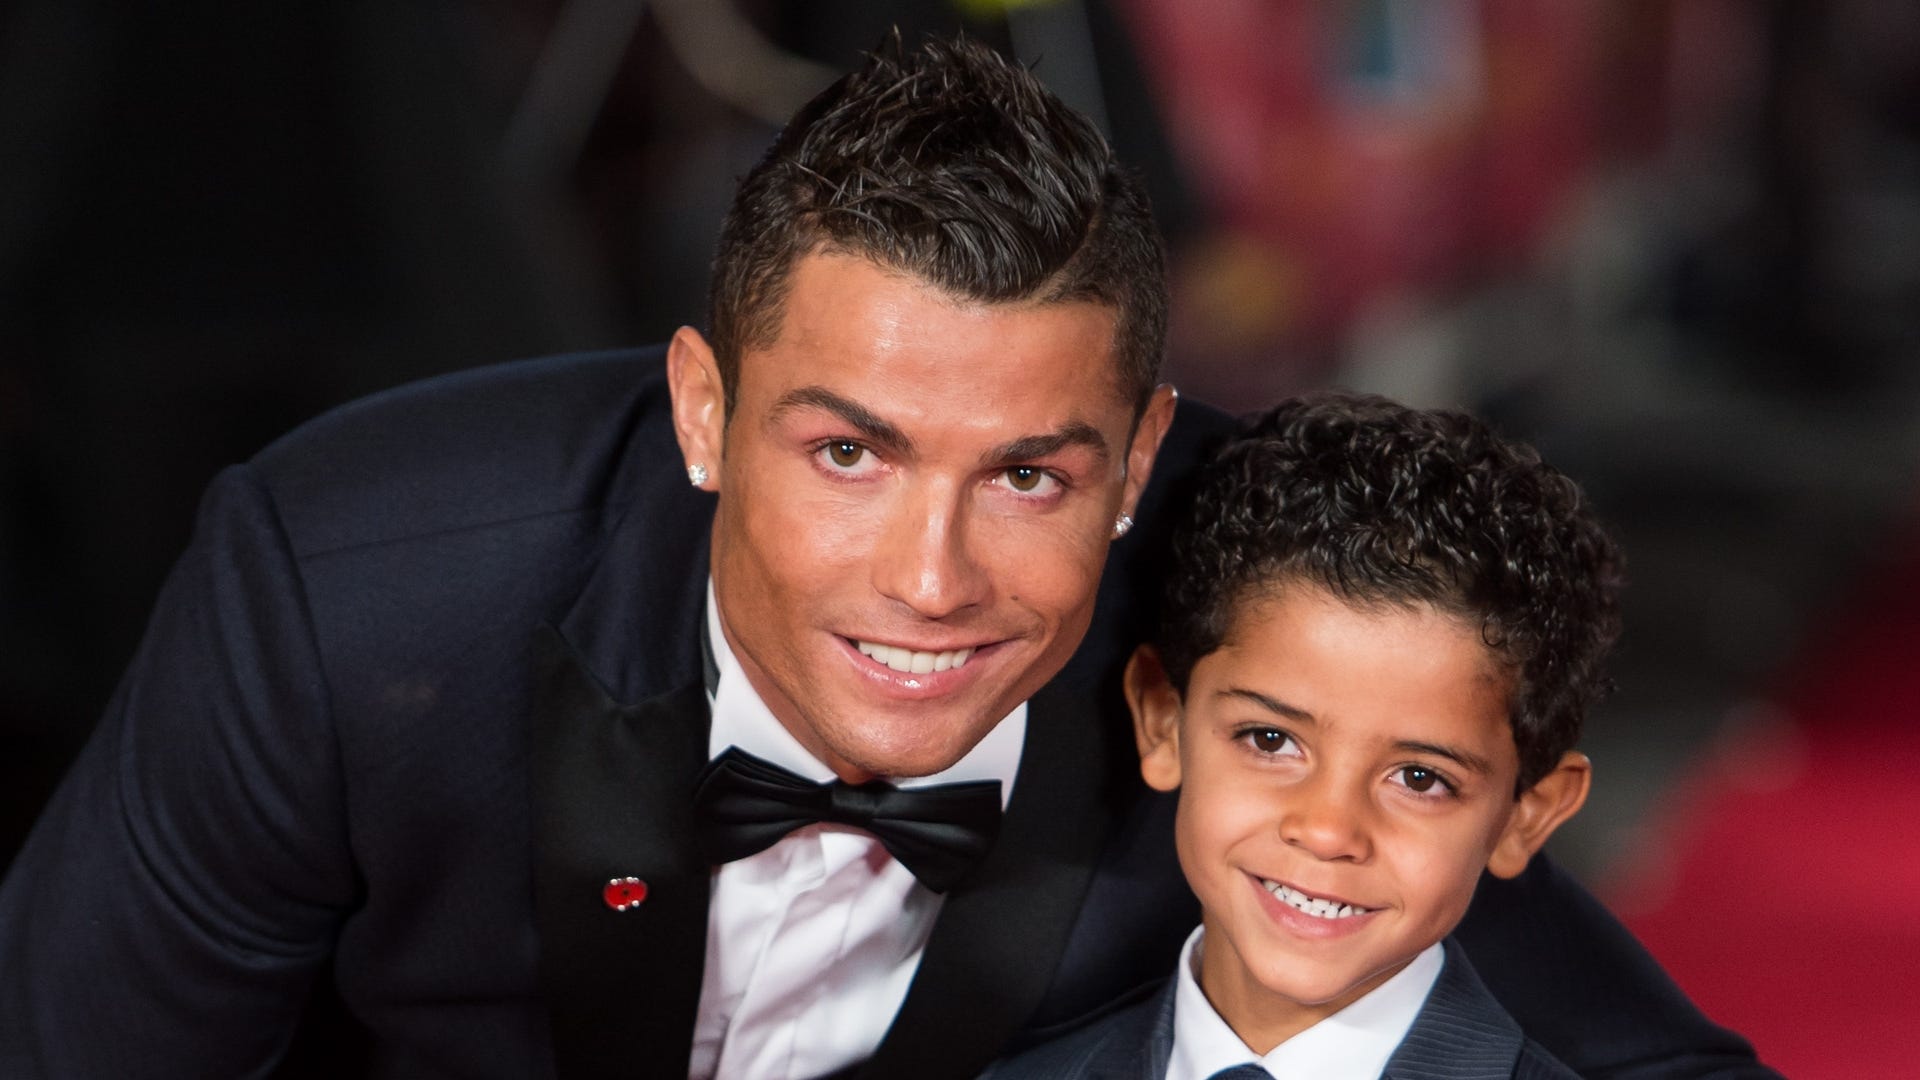 Cristiano Ronaldo How many children does he have & what are their